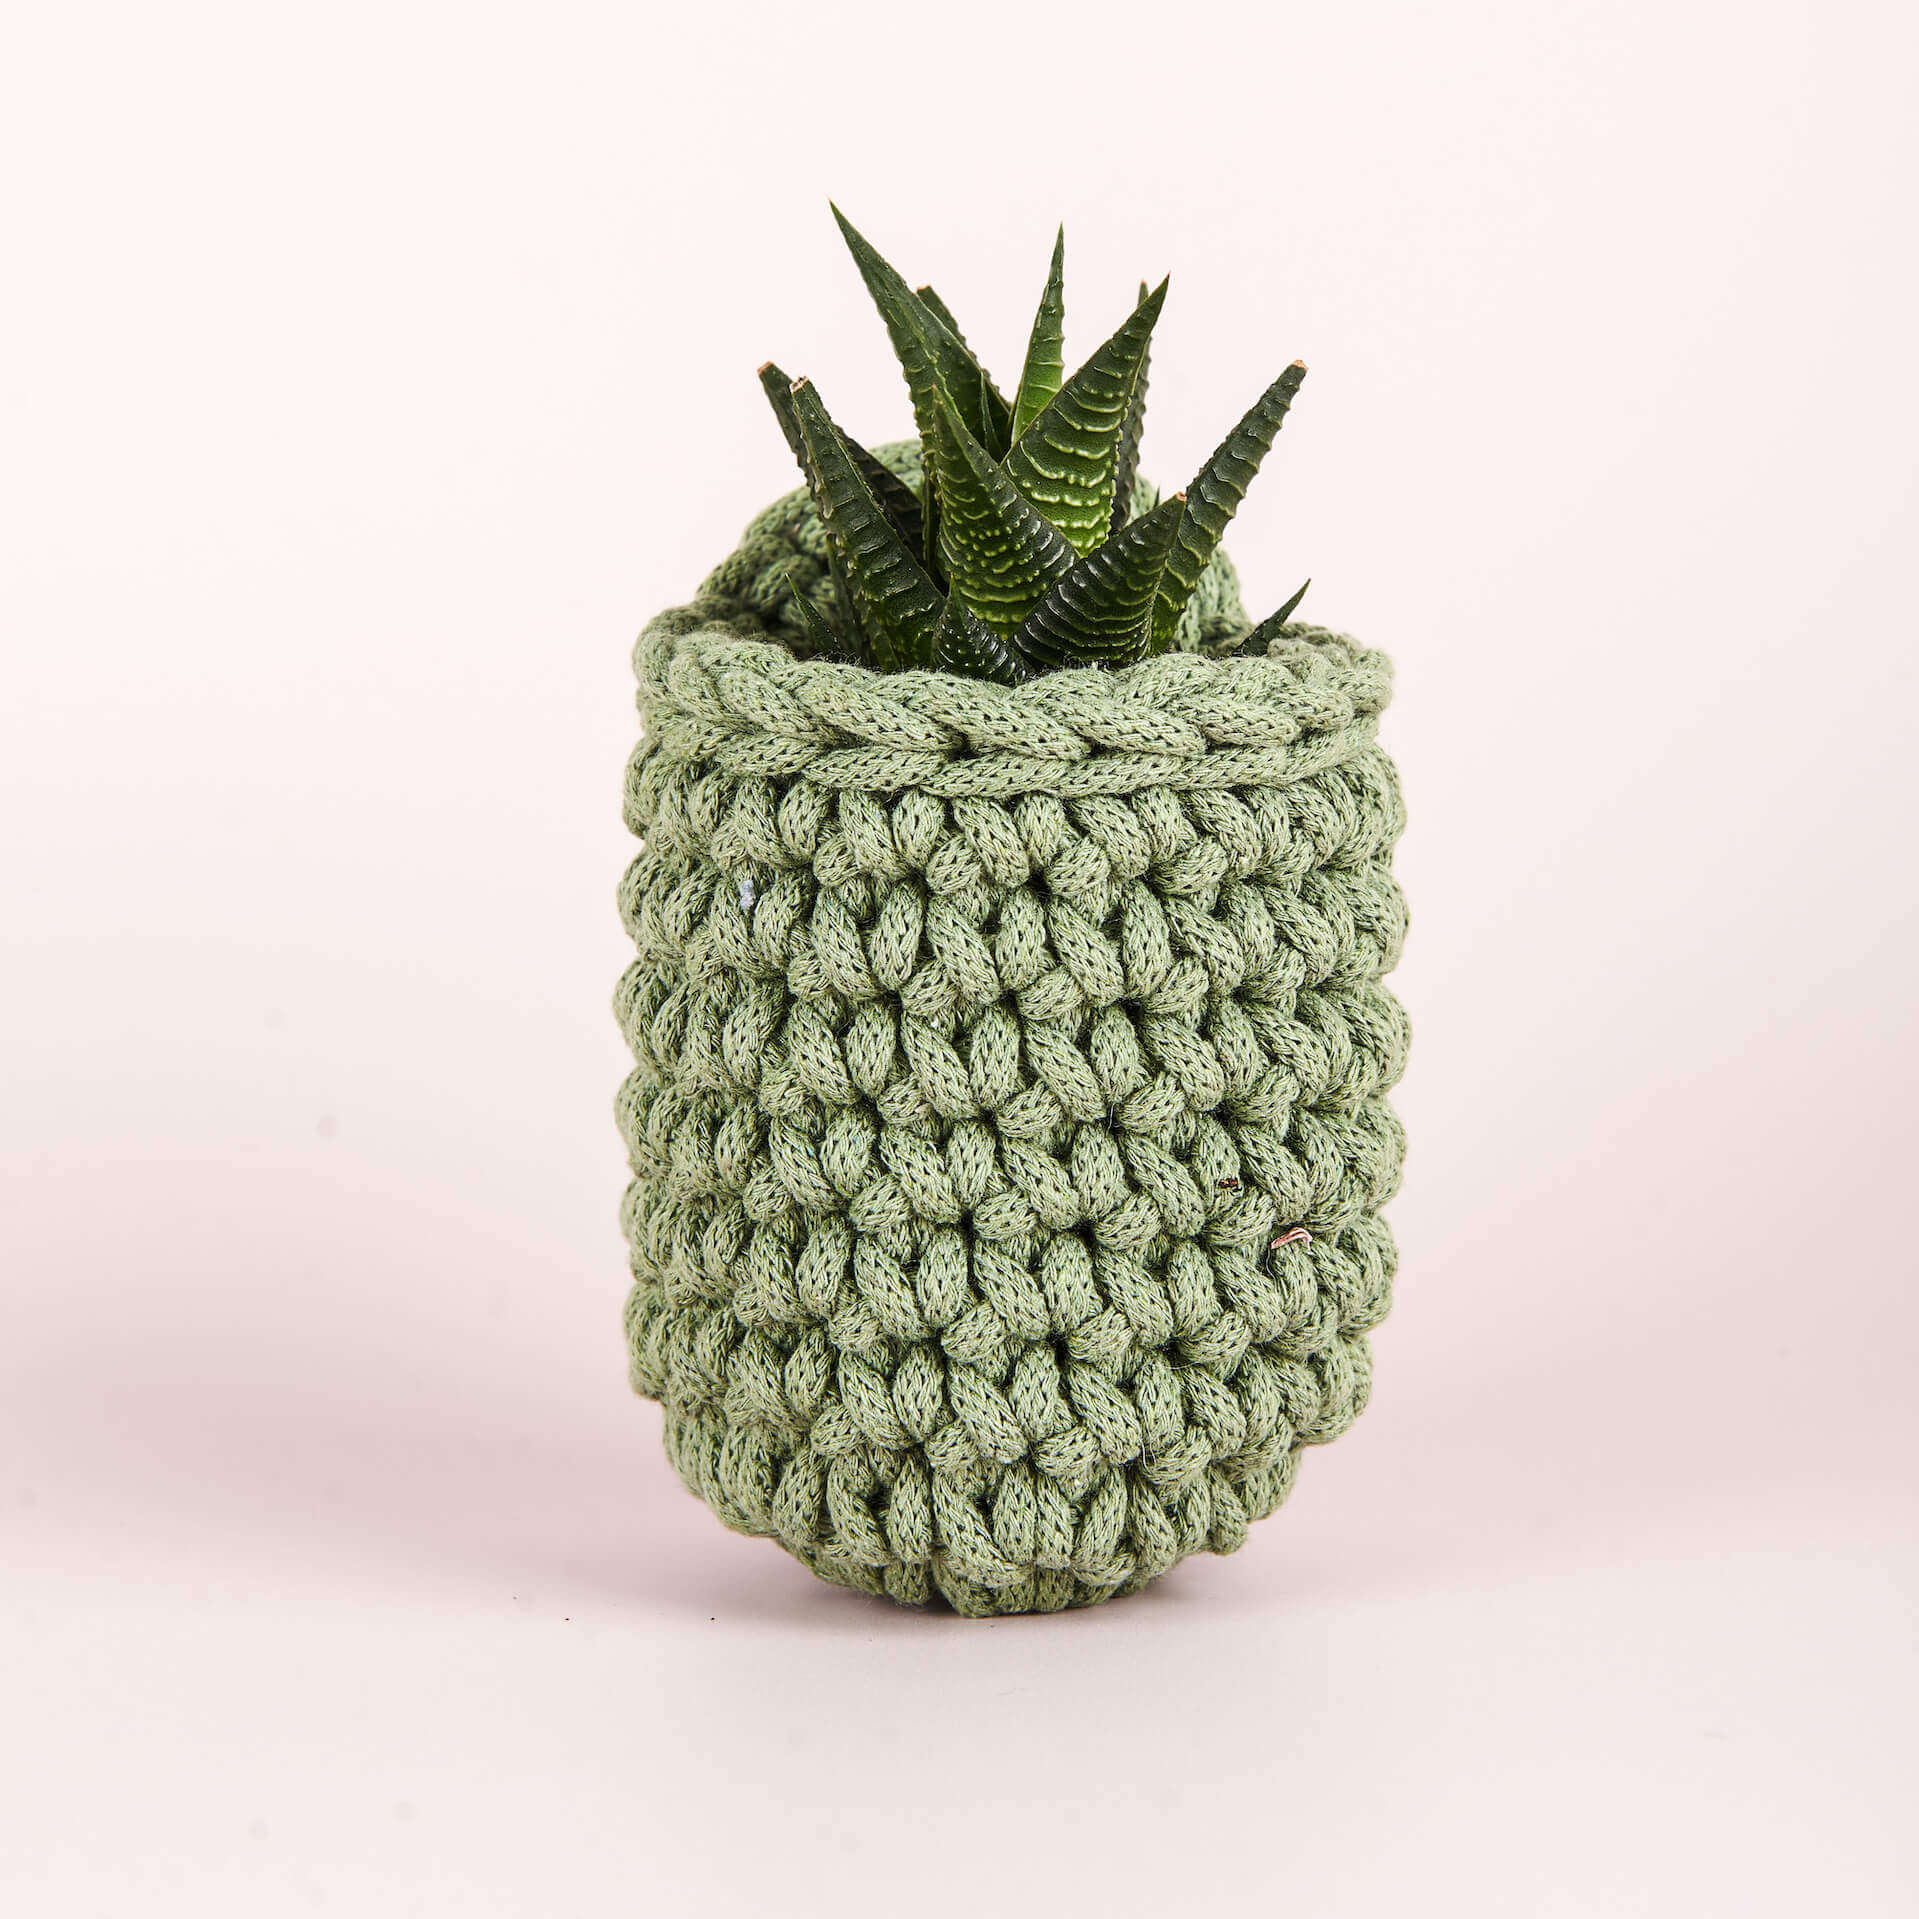 Small green crochet easy peasy pot by Stitching me Softly